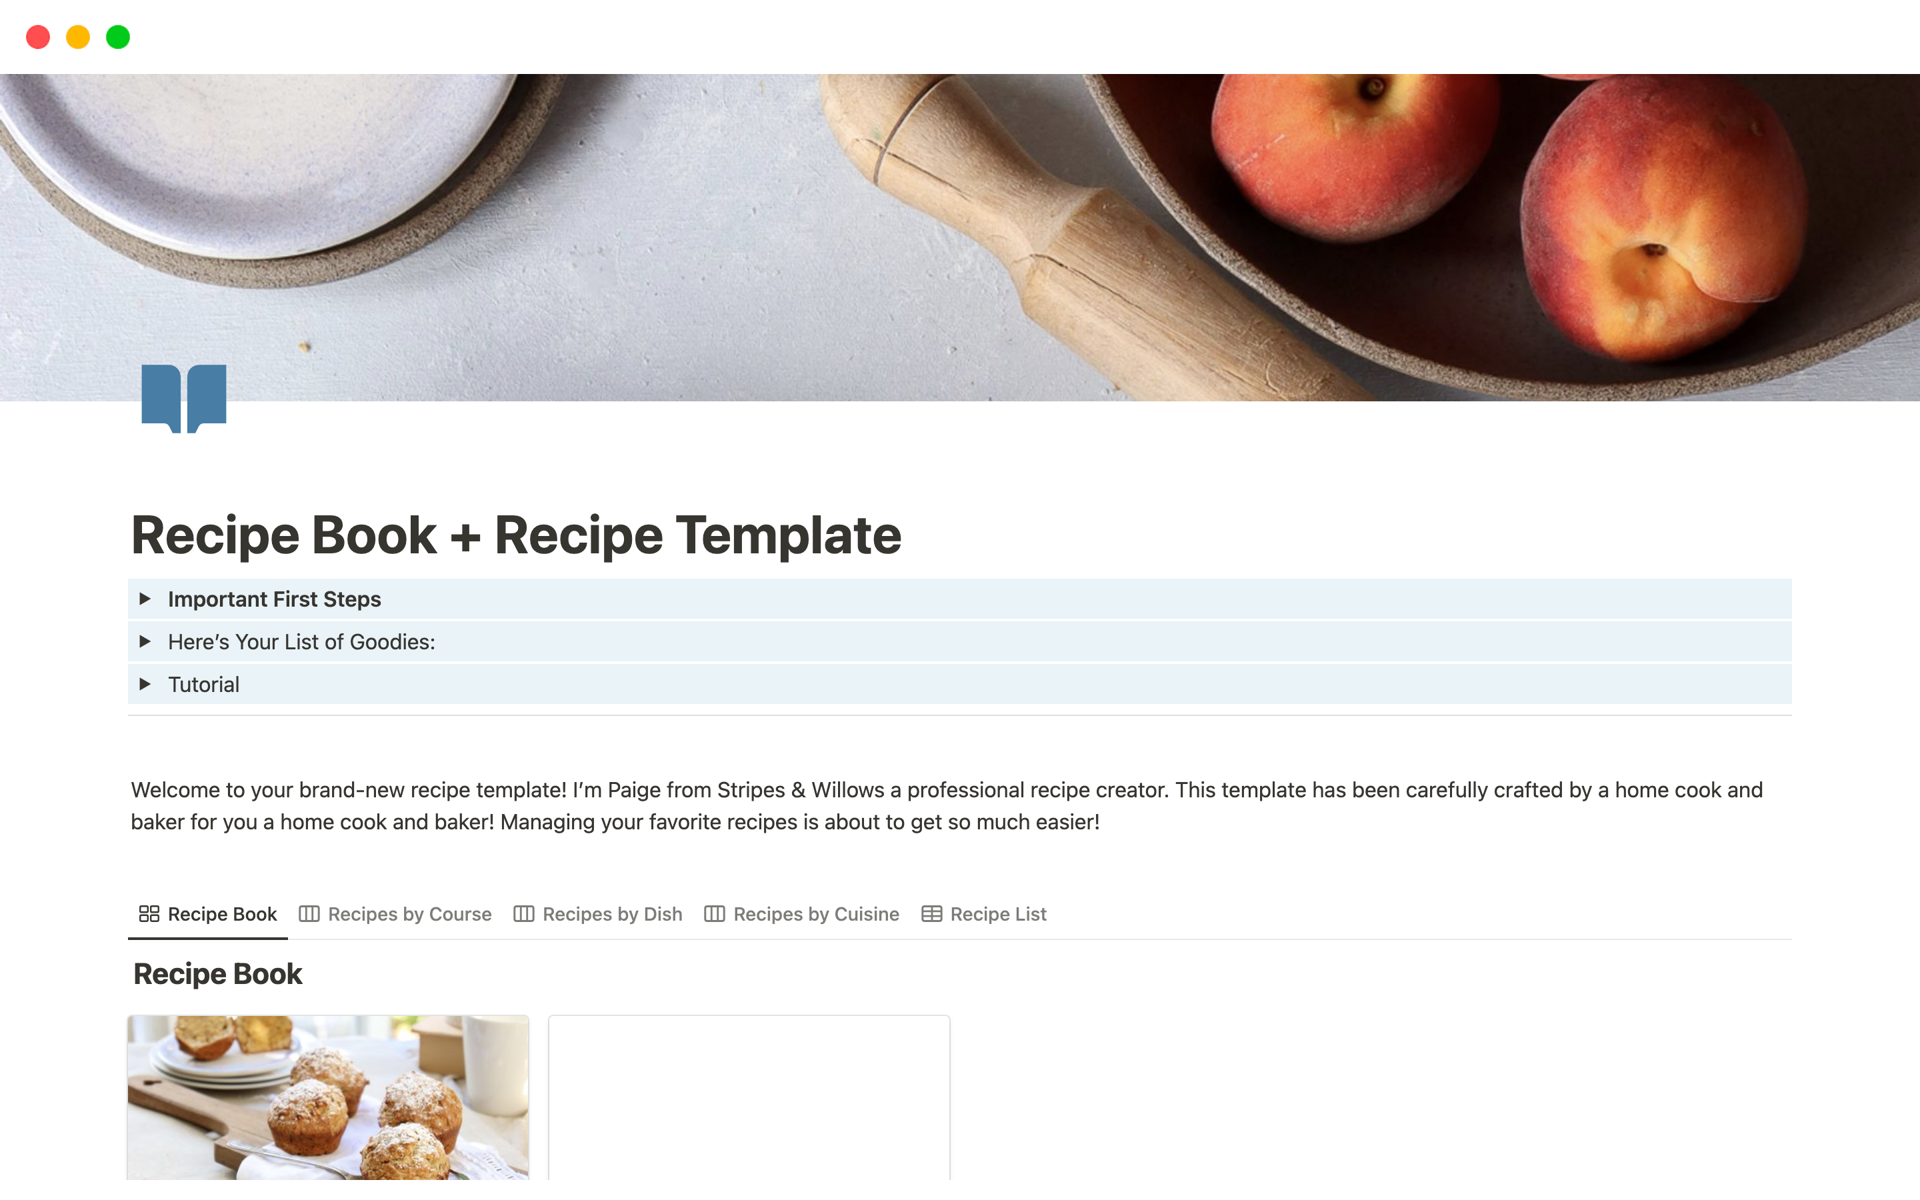 A digital recipe book to store all your beloved recipes, with a simple organized recipe book, easy-to-use recipe template, and bonus recipe from Stripes & Willows.